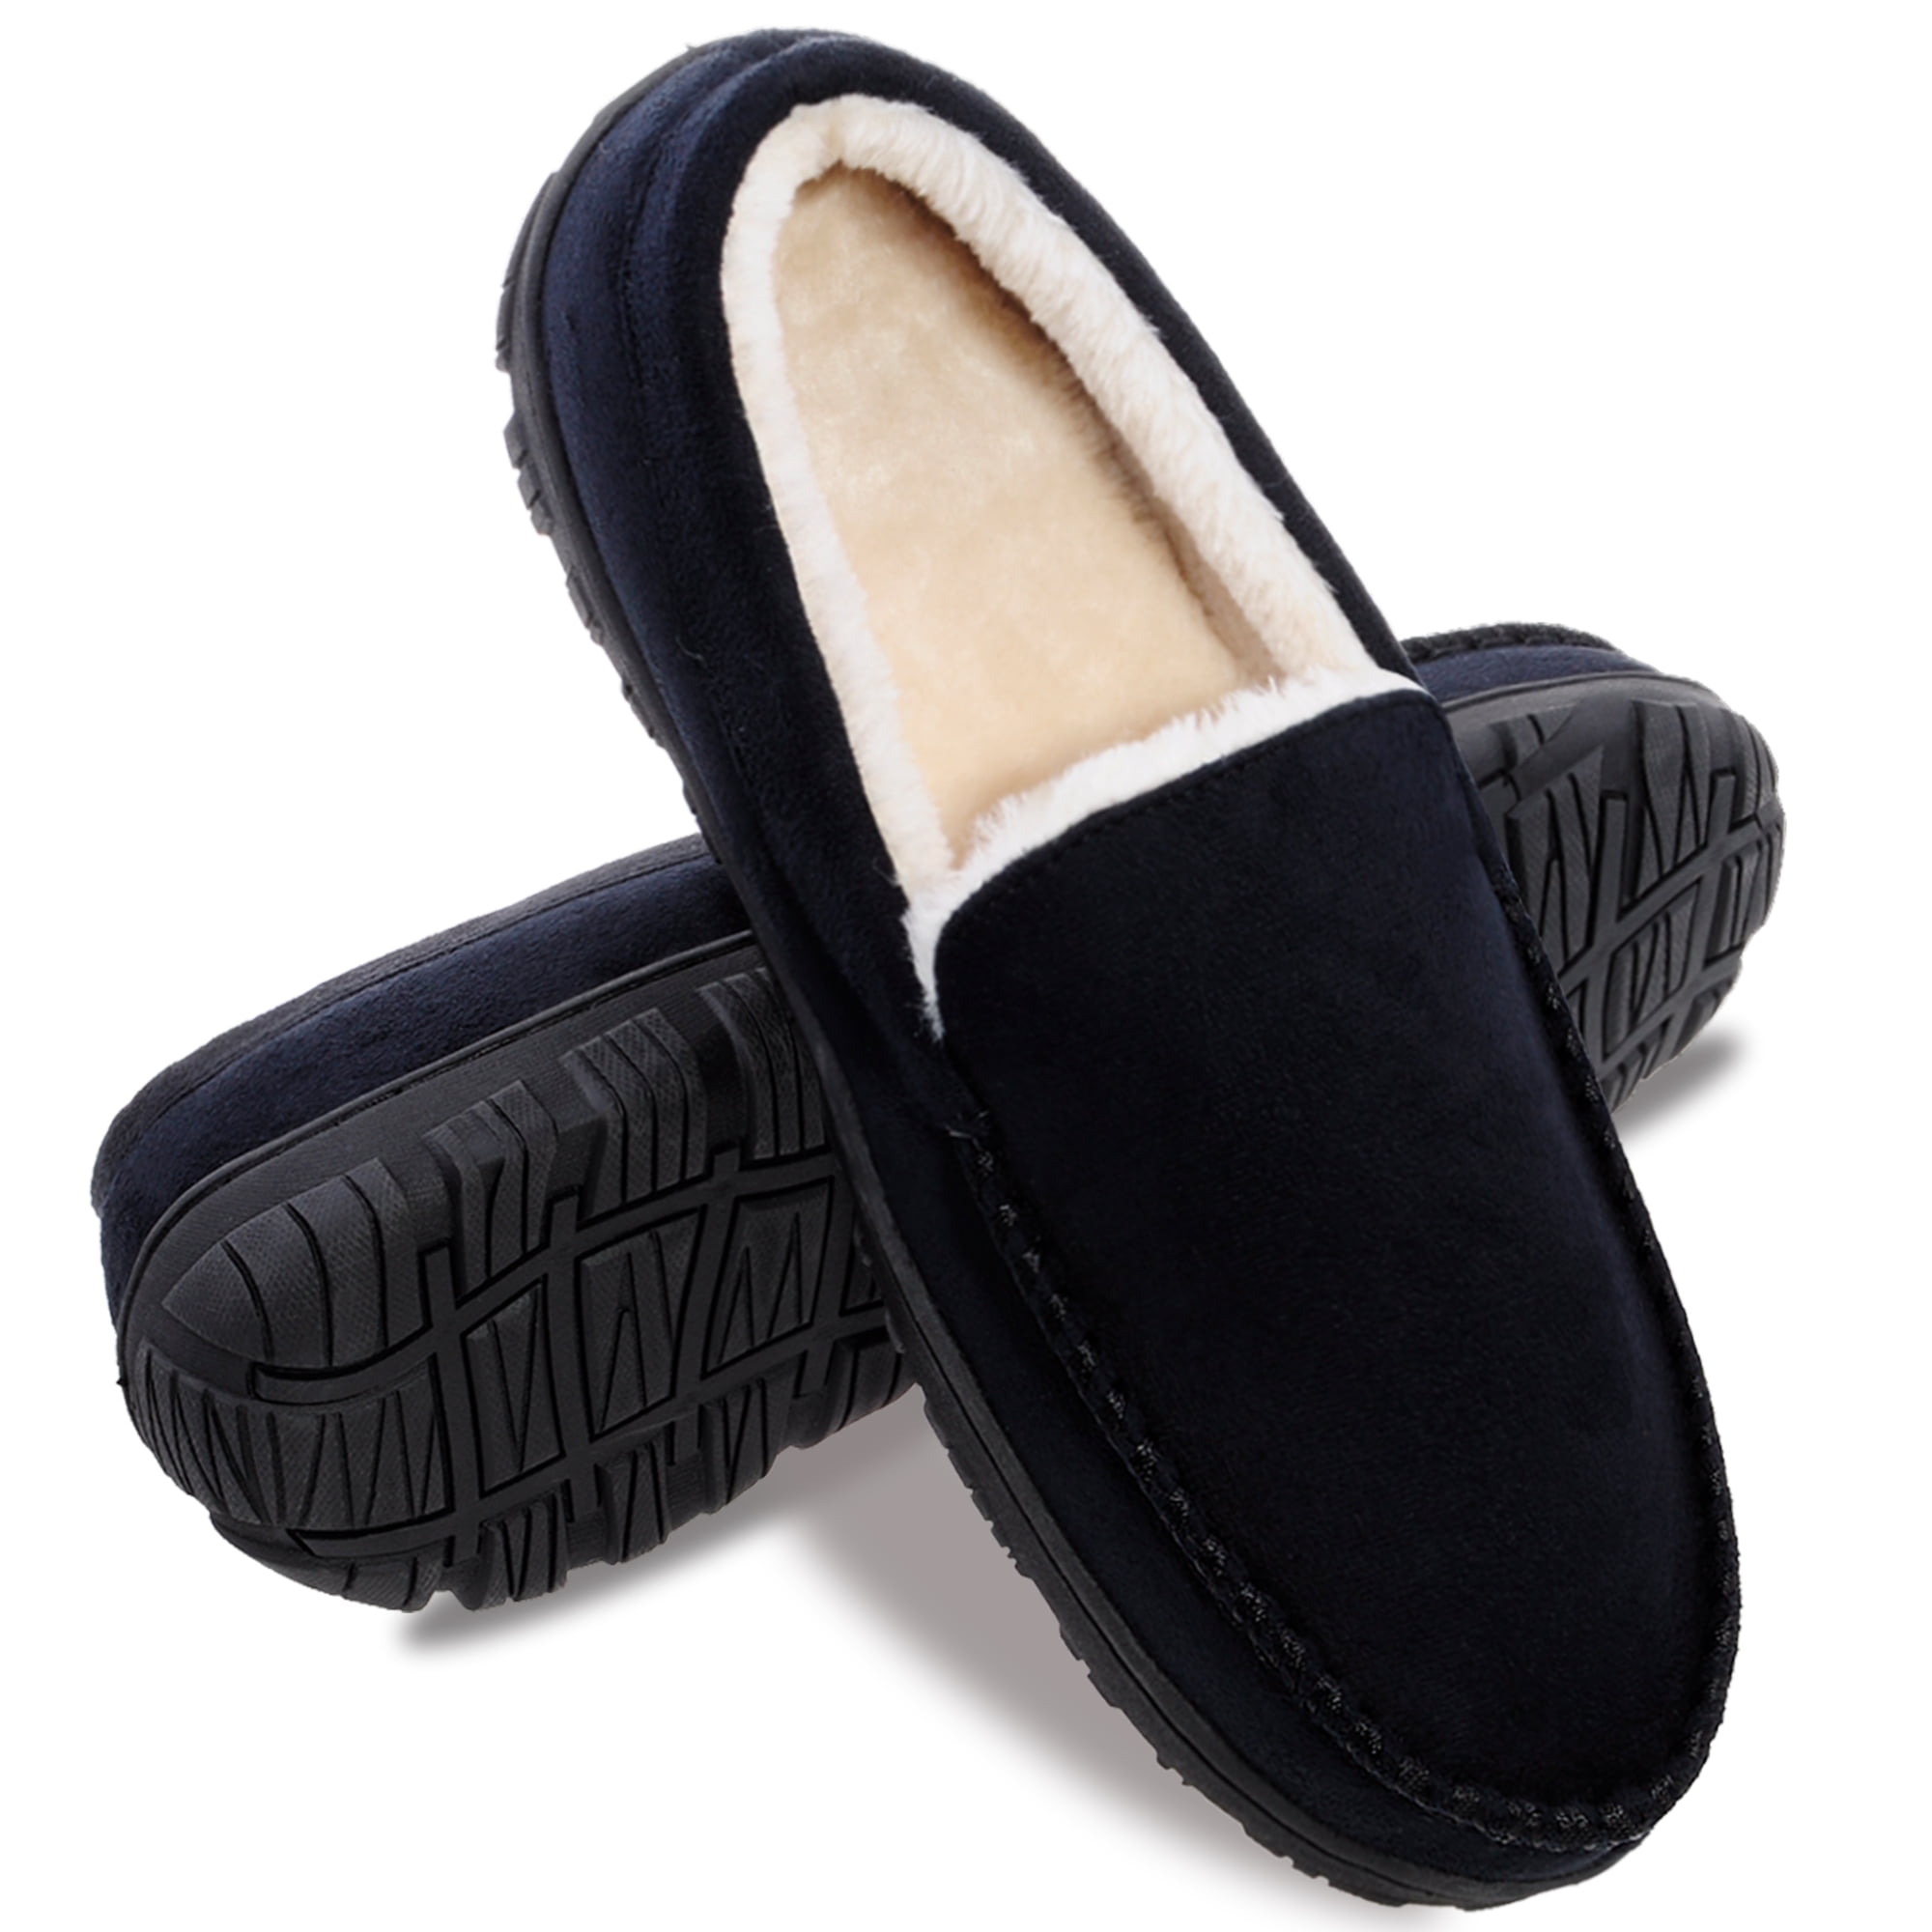 HOMEHOT House Slippers for Men's Moccasin Slippers with Rubber Hard Sole Slip on Memory Foam Slippers for Bedroom Indoor Outdoor Black 